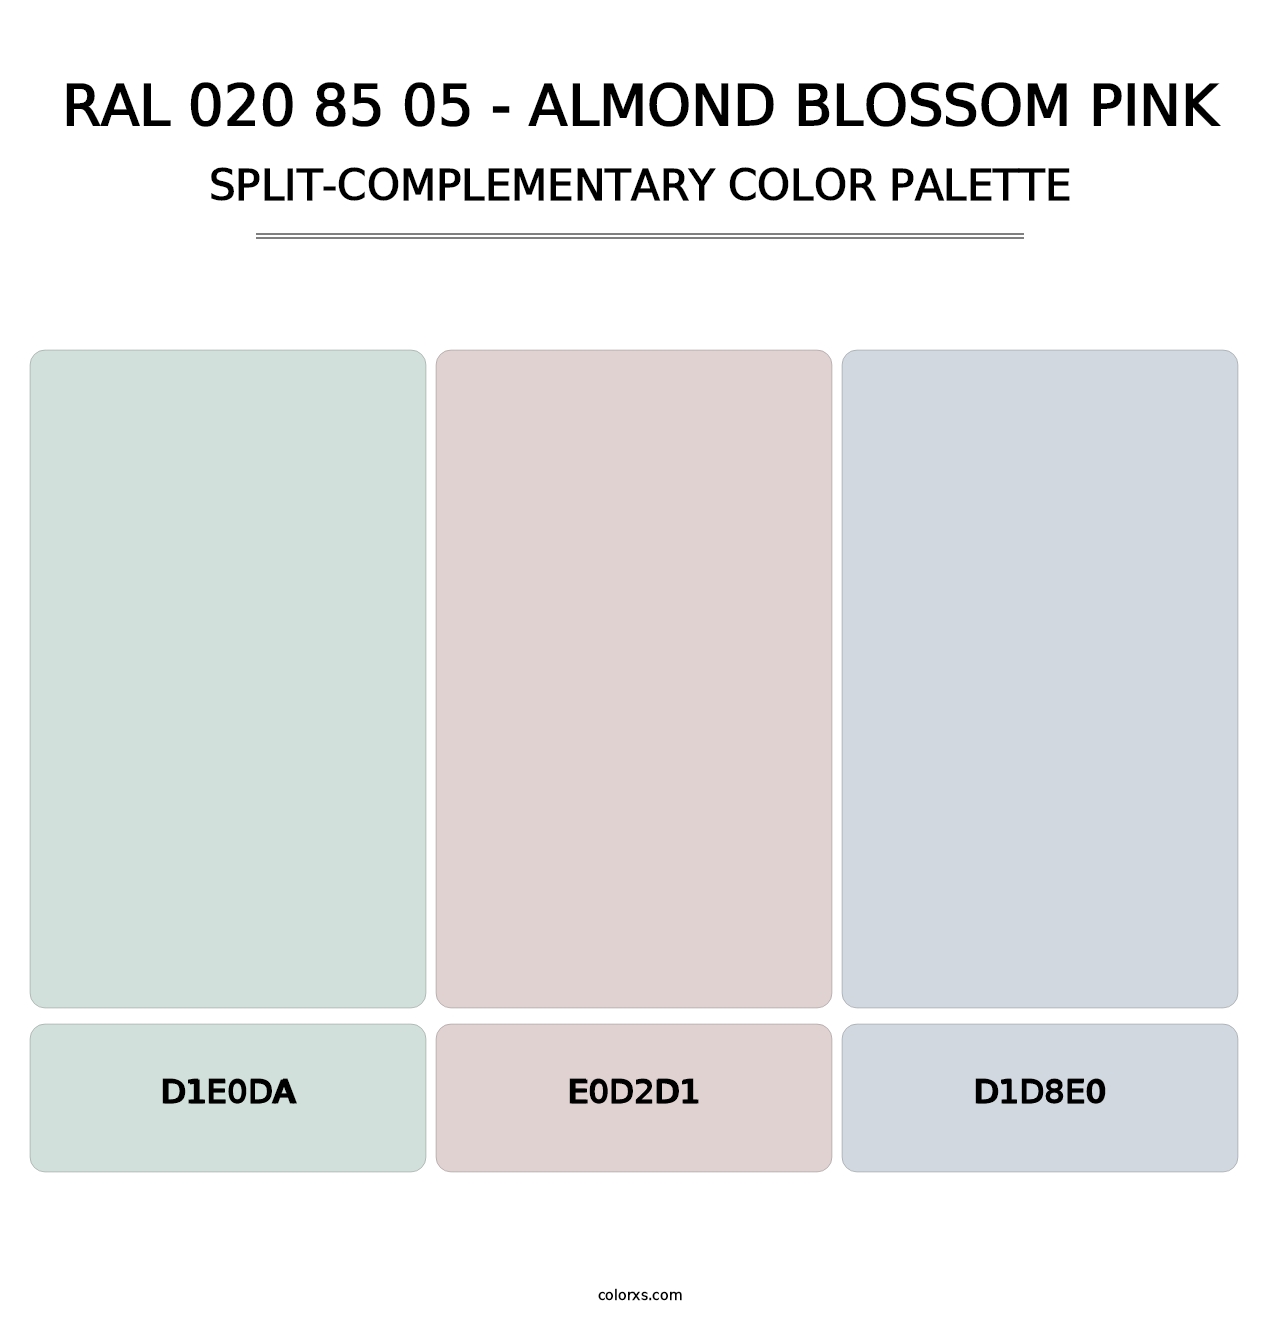 RAL 020 85 05 - Almond Blossom Pink - Split-Complementary Color Palette